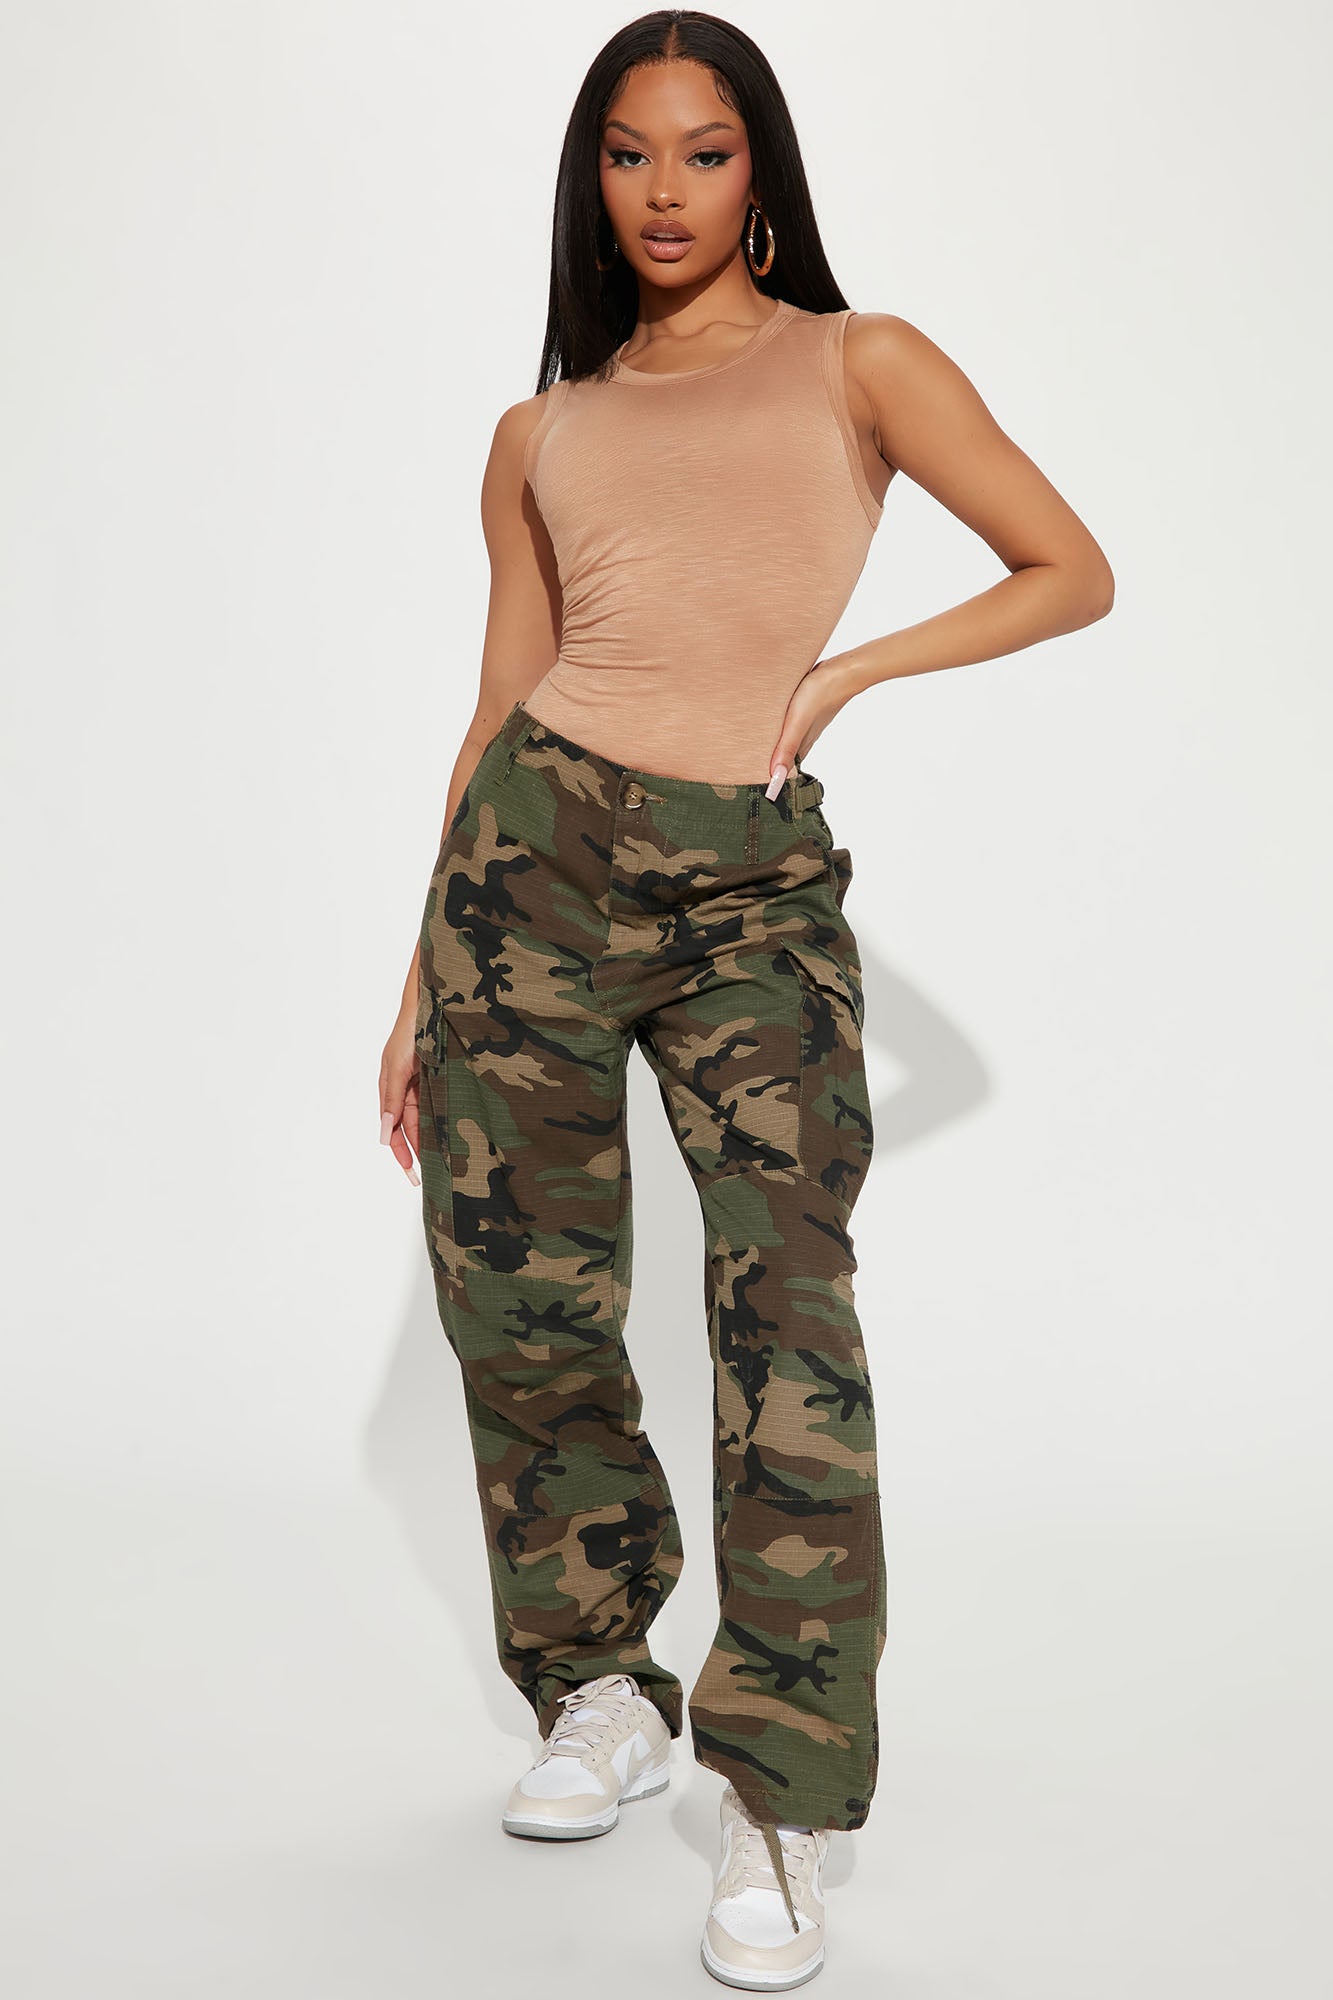 Lastesso Daily Deals of The Day Prime Today Only Women Camo Pants Slimming  Size Cinch Bottom Trousers High Waisted Legging Trendy Combat Work Pants  with Pockets Women Casual Pants Green S at